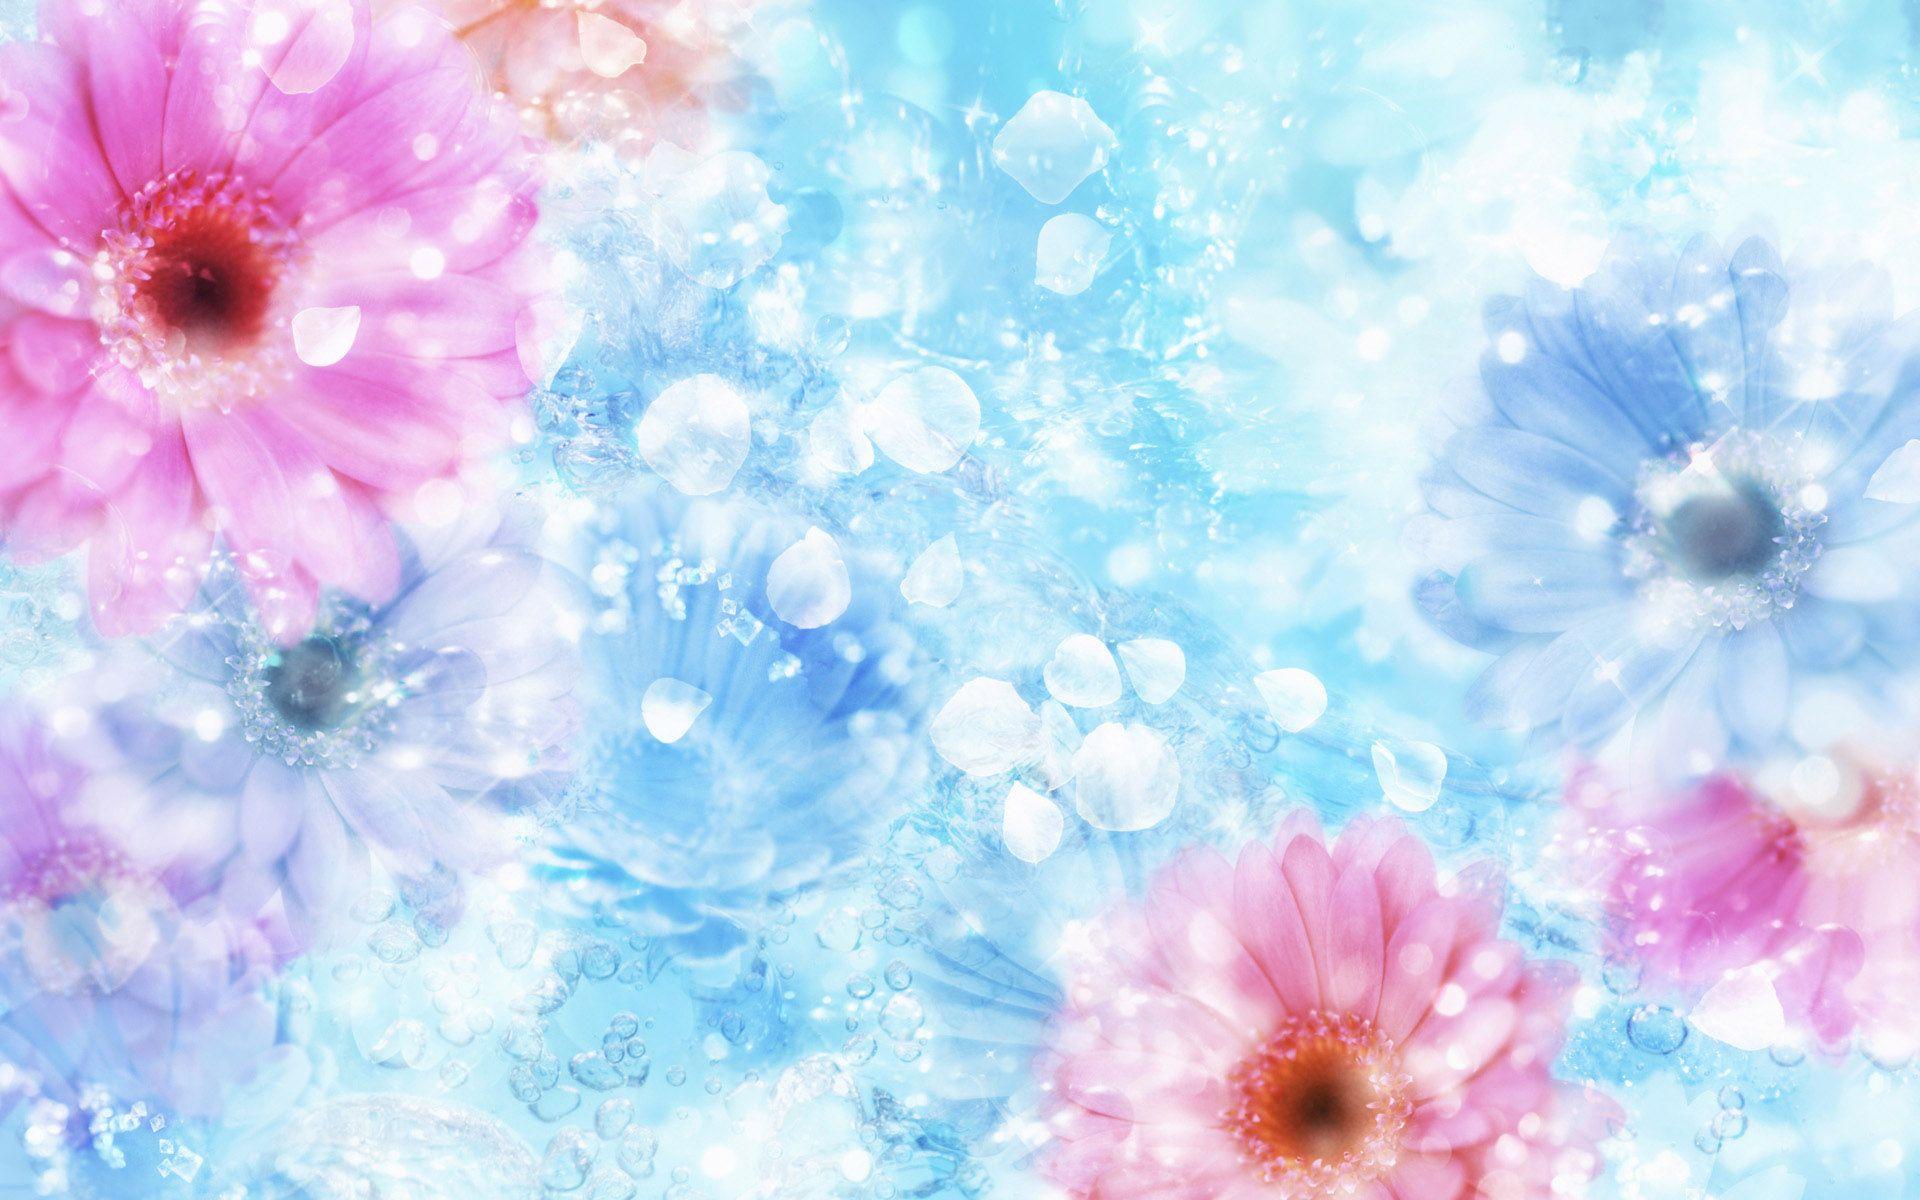 White And Blue Flowers Tumblr Background 1 HD Wallpaper. lzamgs